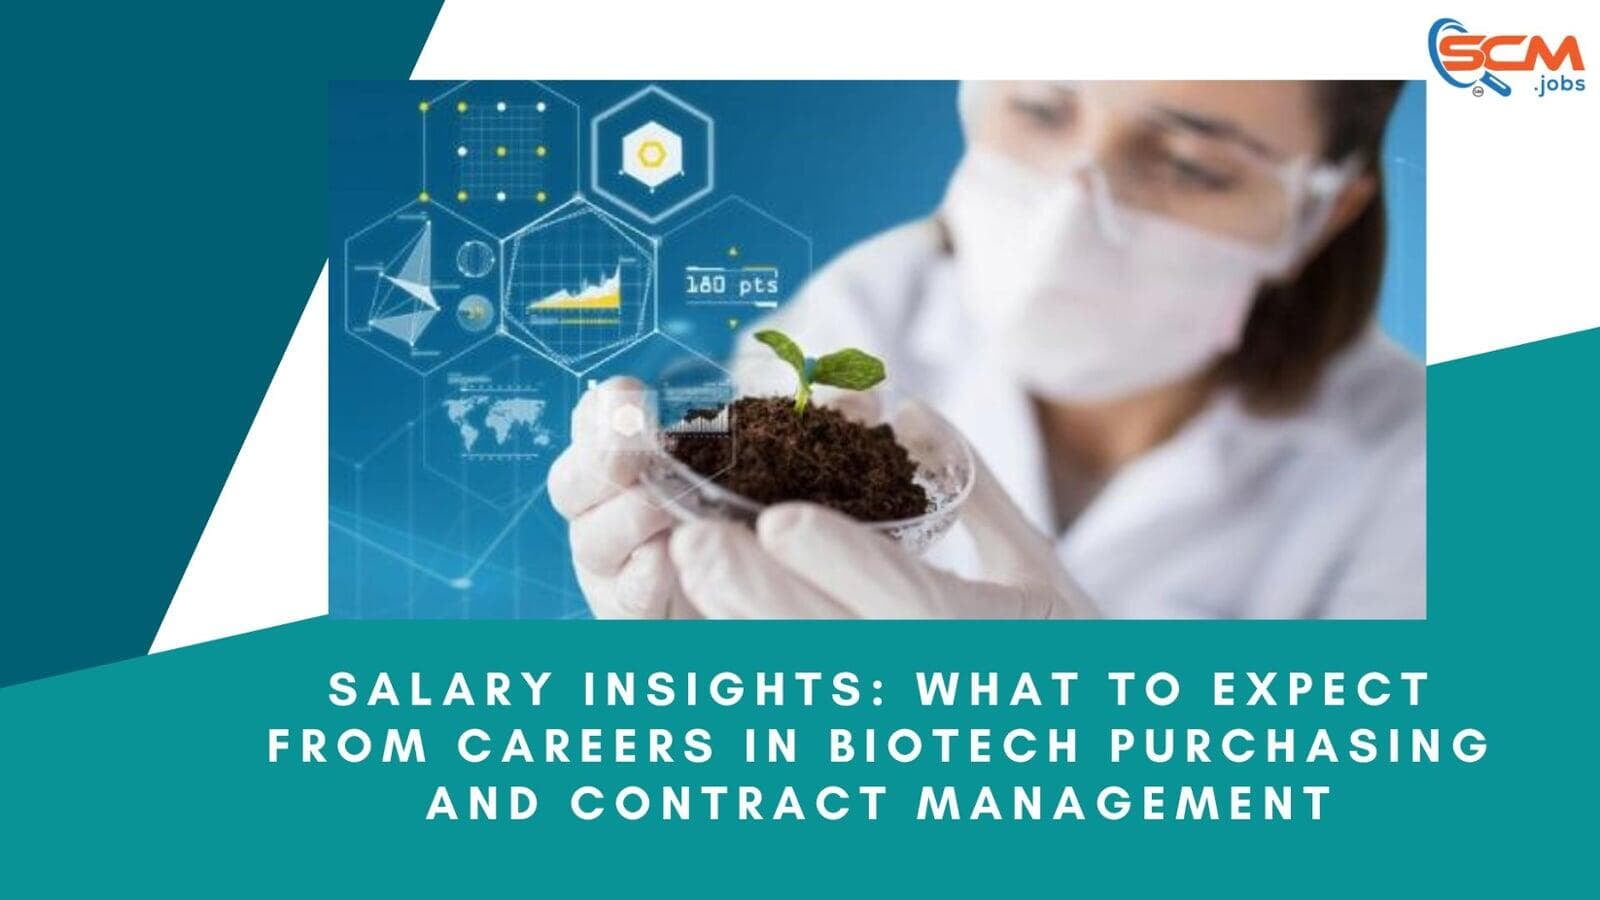 Salary Insights: What to Expect from Careers in Biotech Purchasing and Contract Management